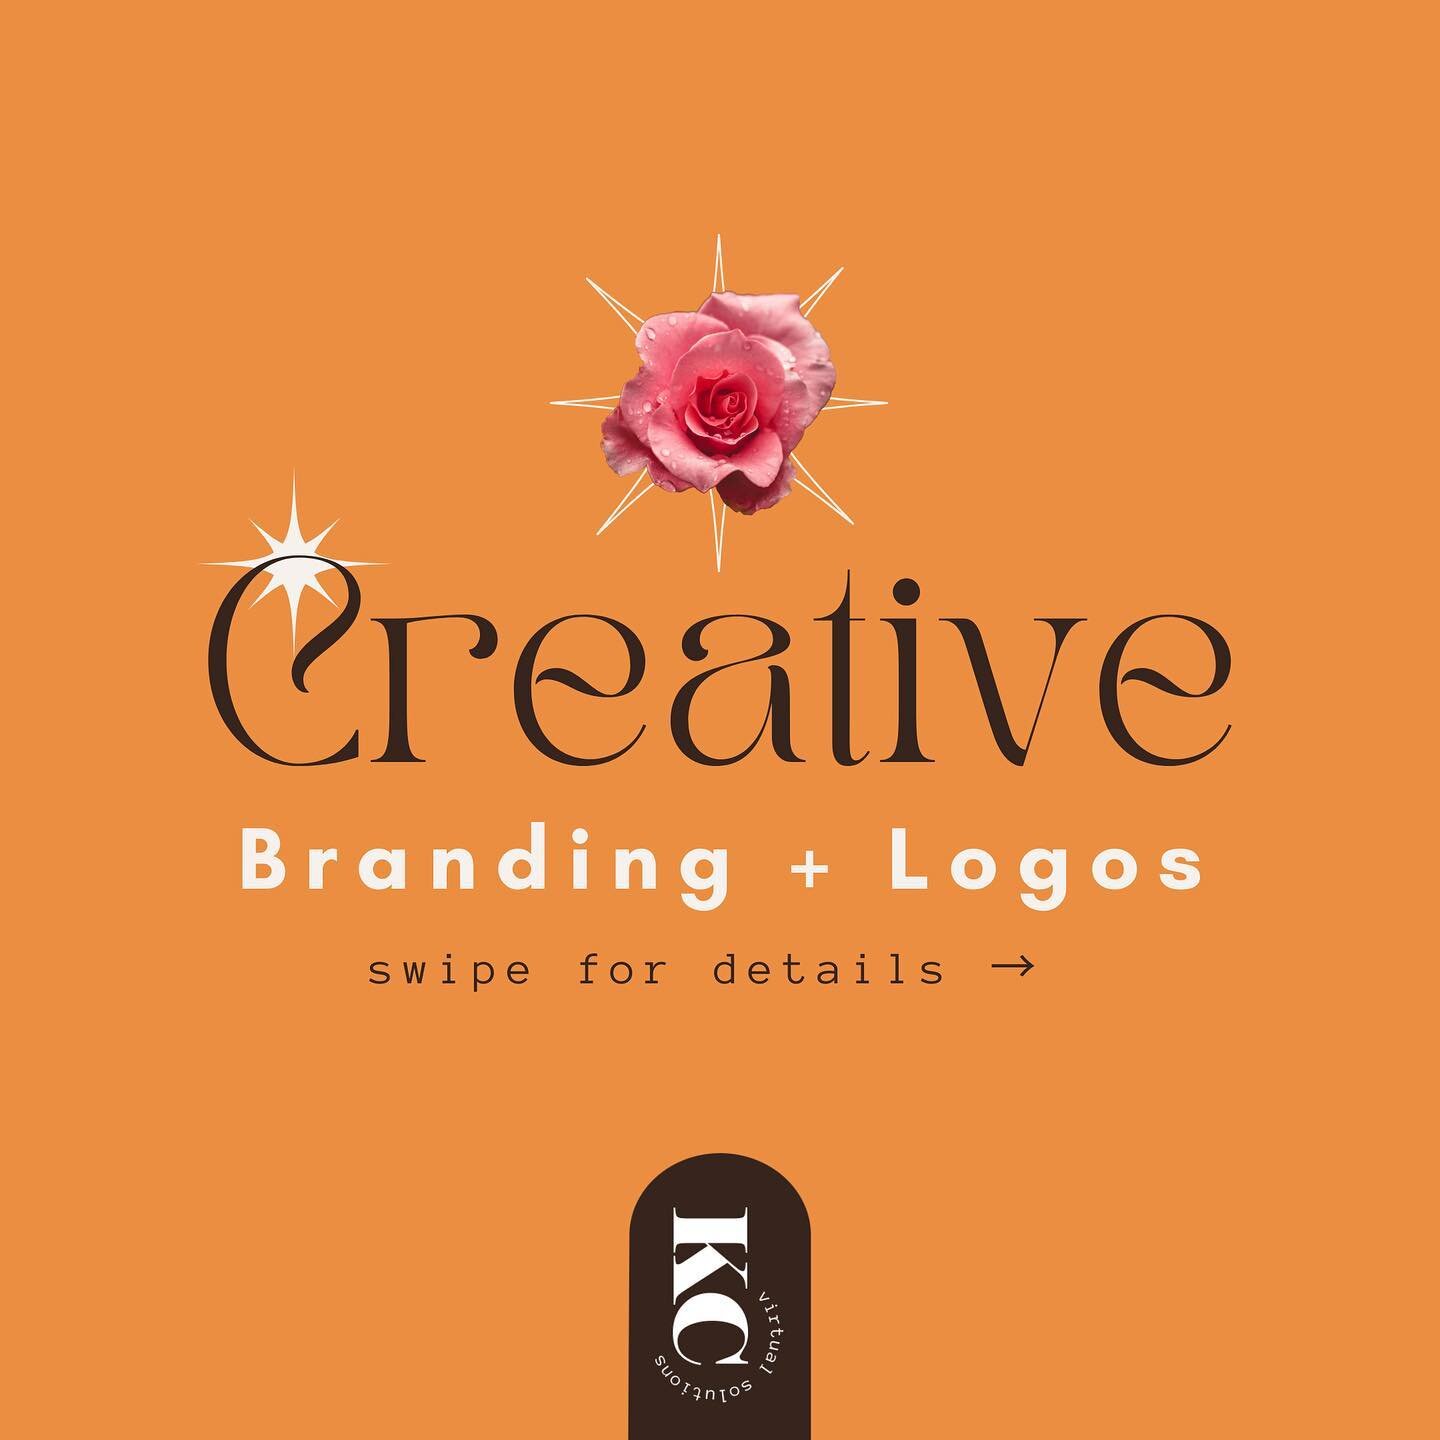 Sometimes you just can&rsquo;t decide on a lockup&hellip; 🙃

Fun little fact: when you order any custom logo + branding package from me, I include 3-6 initial logo  concepts to select your final logo from. The only hard part of my design process is 